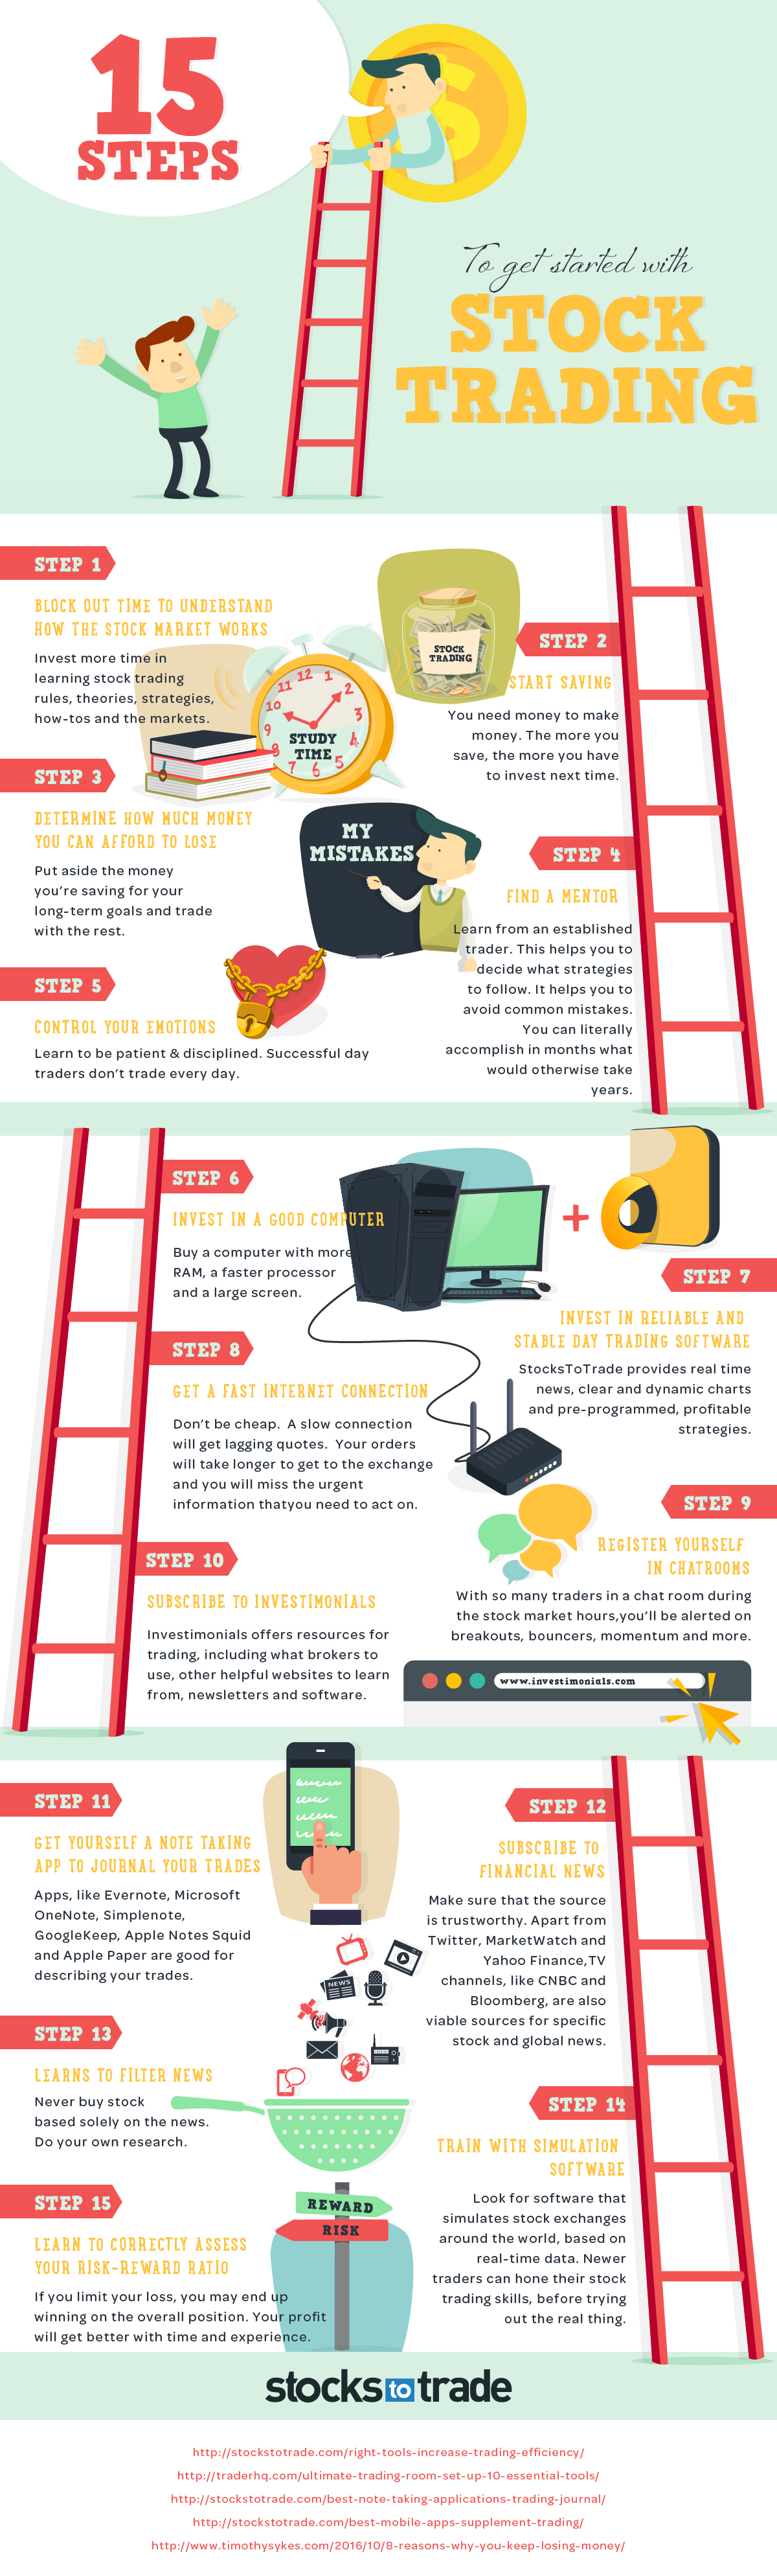 15 Steps To Get Started With Stock Trading {INFOGRAPHIC}